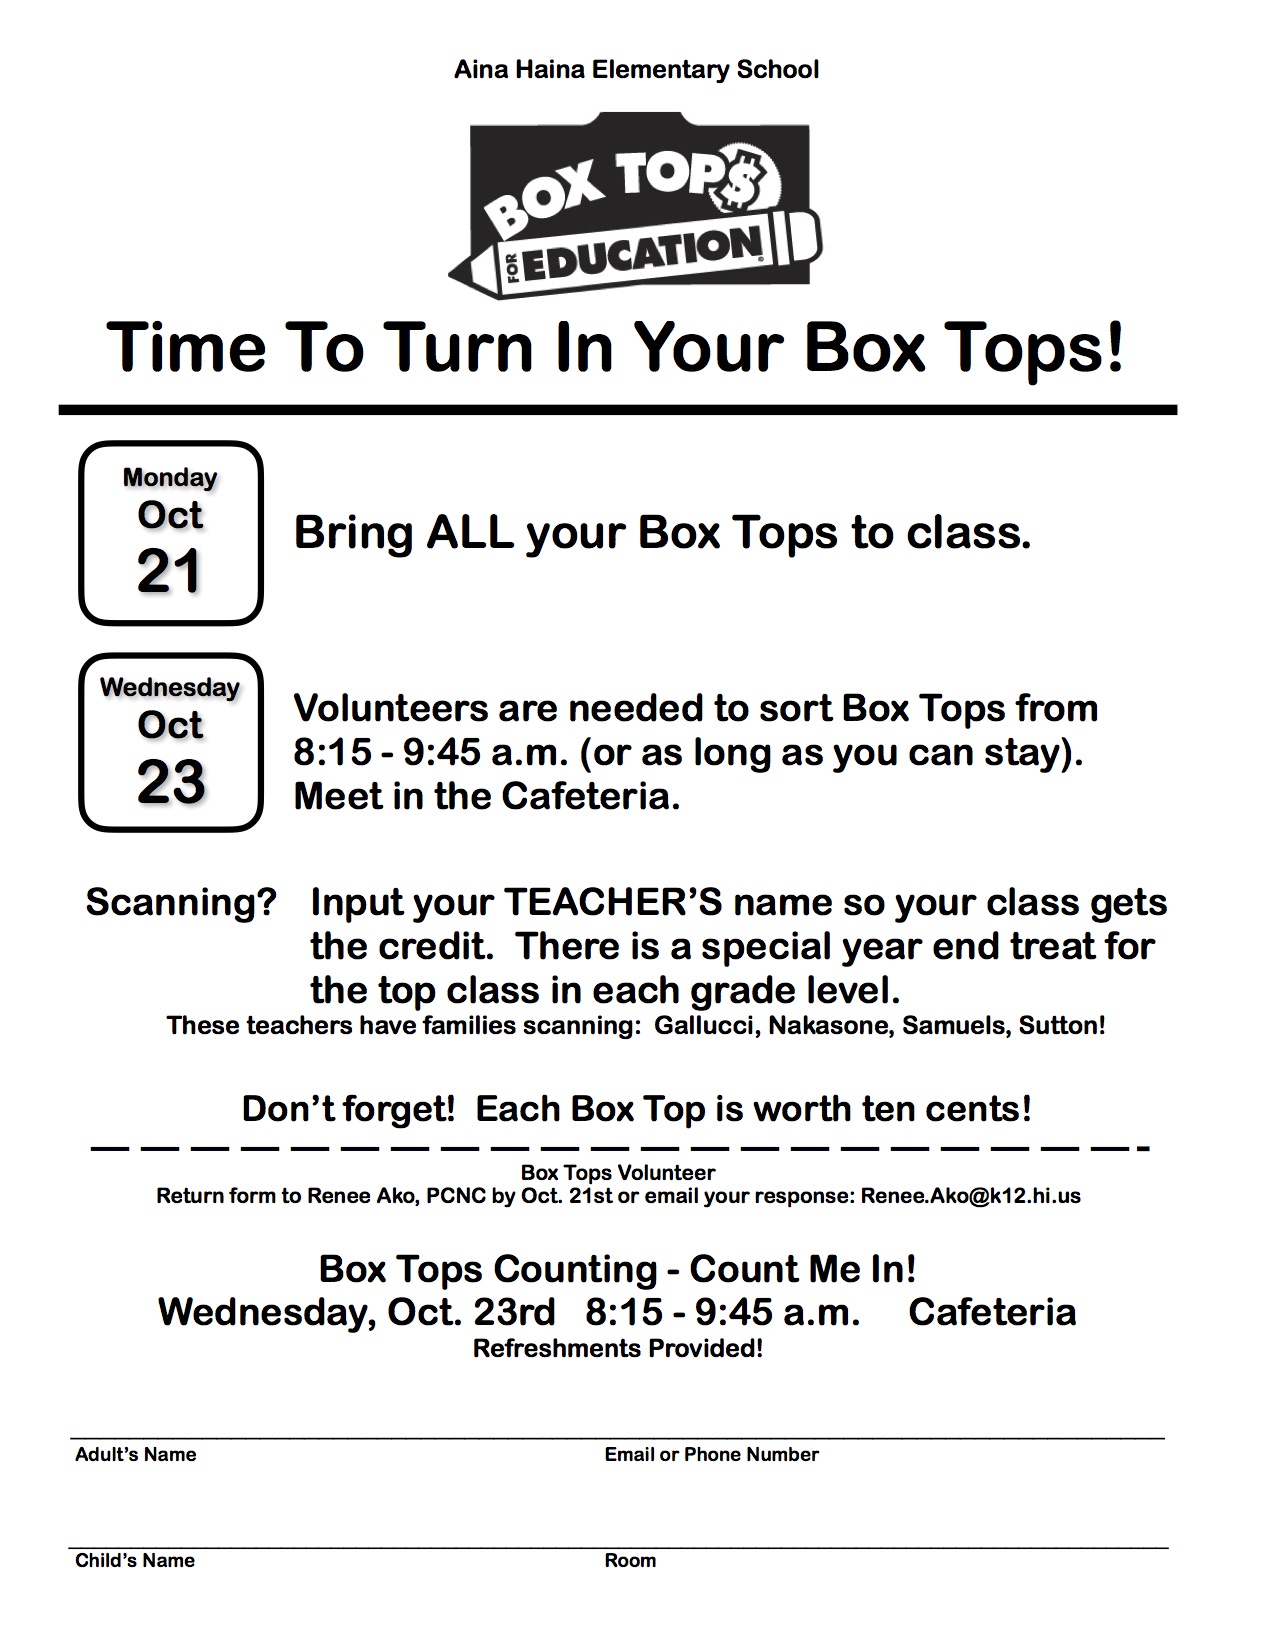 Box Top Counting - Oct